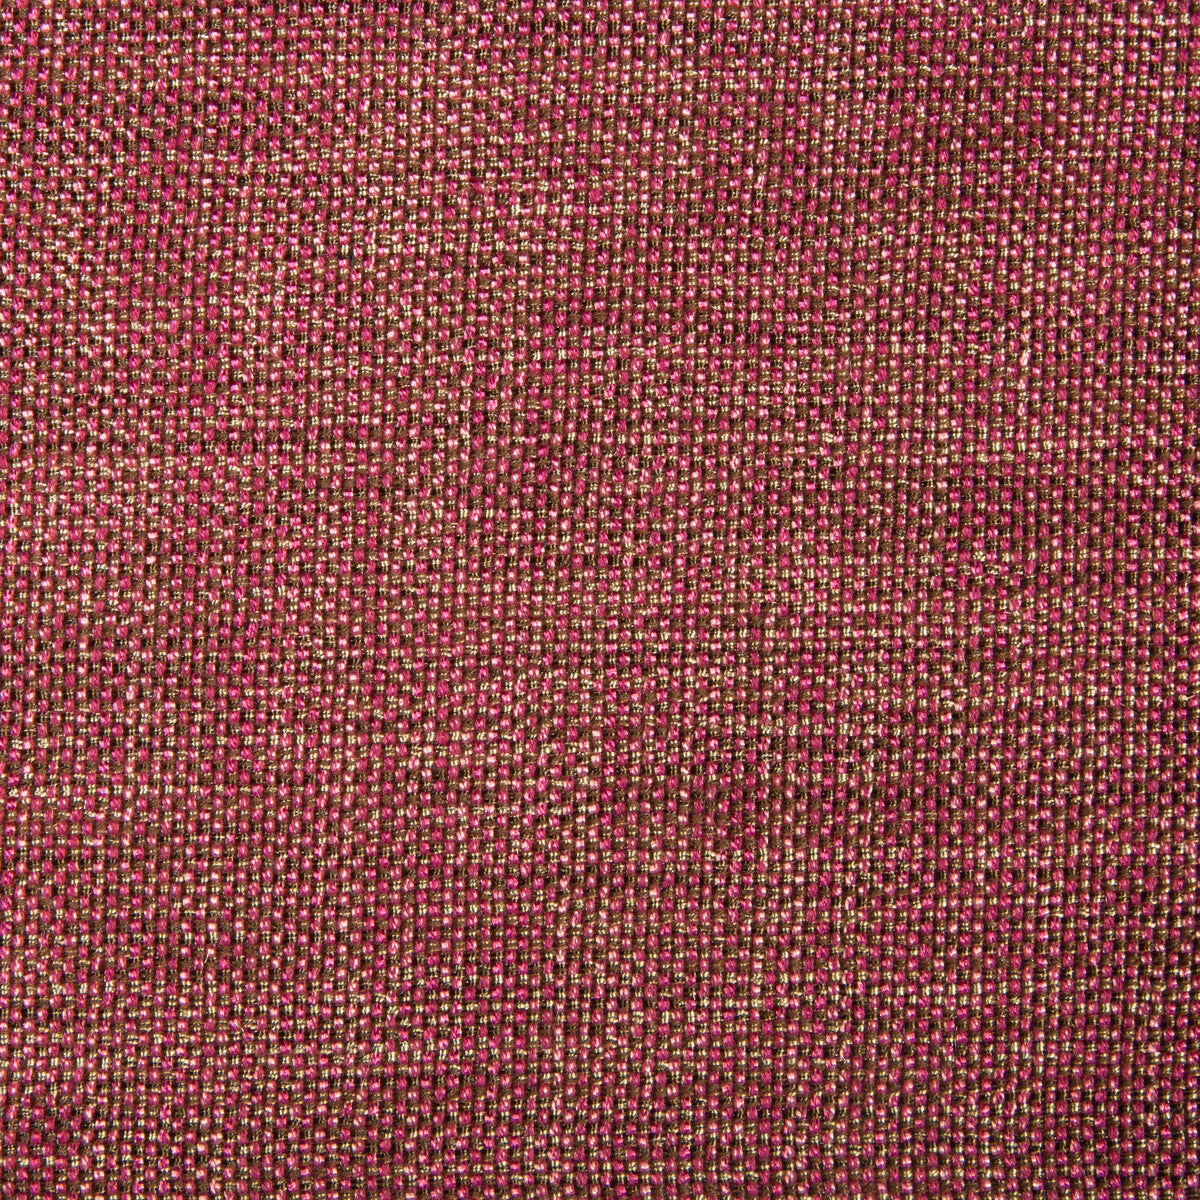 Kravet Contract fabric in 34926-617 color - pattern 34926.617.0 - by Kravet Contract